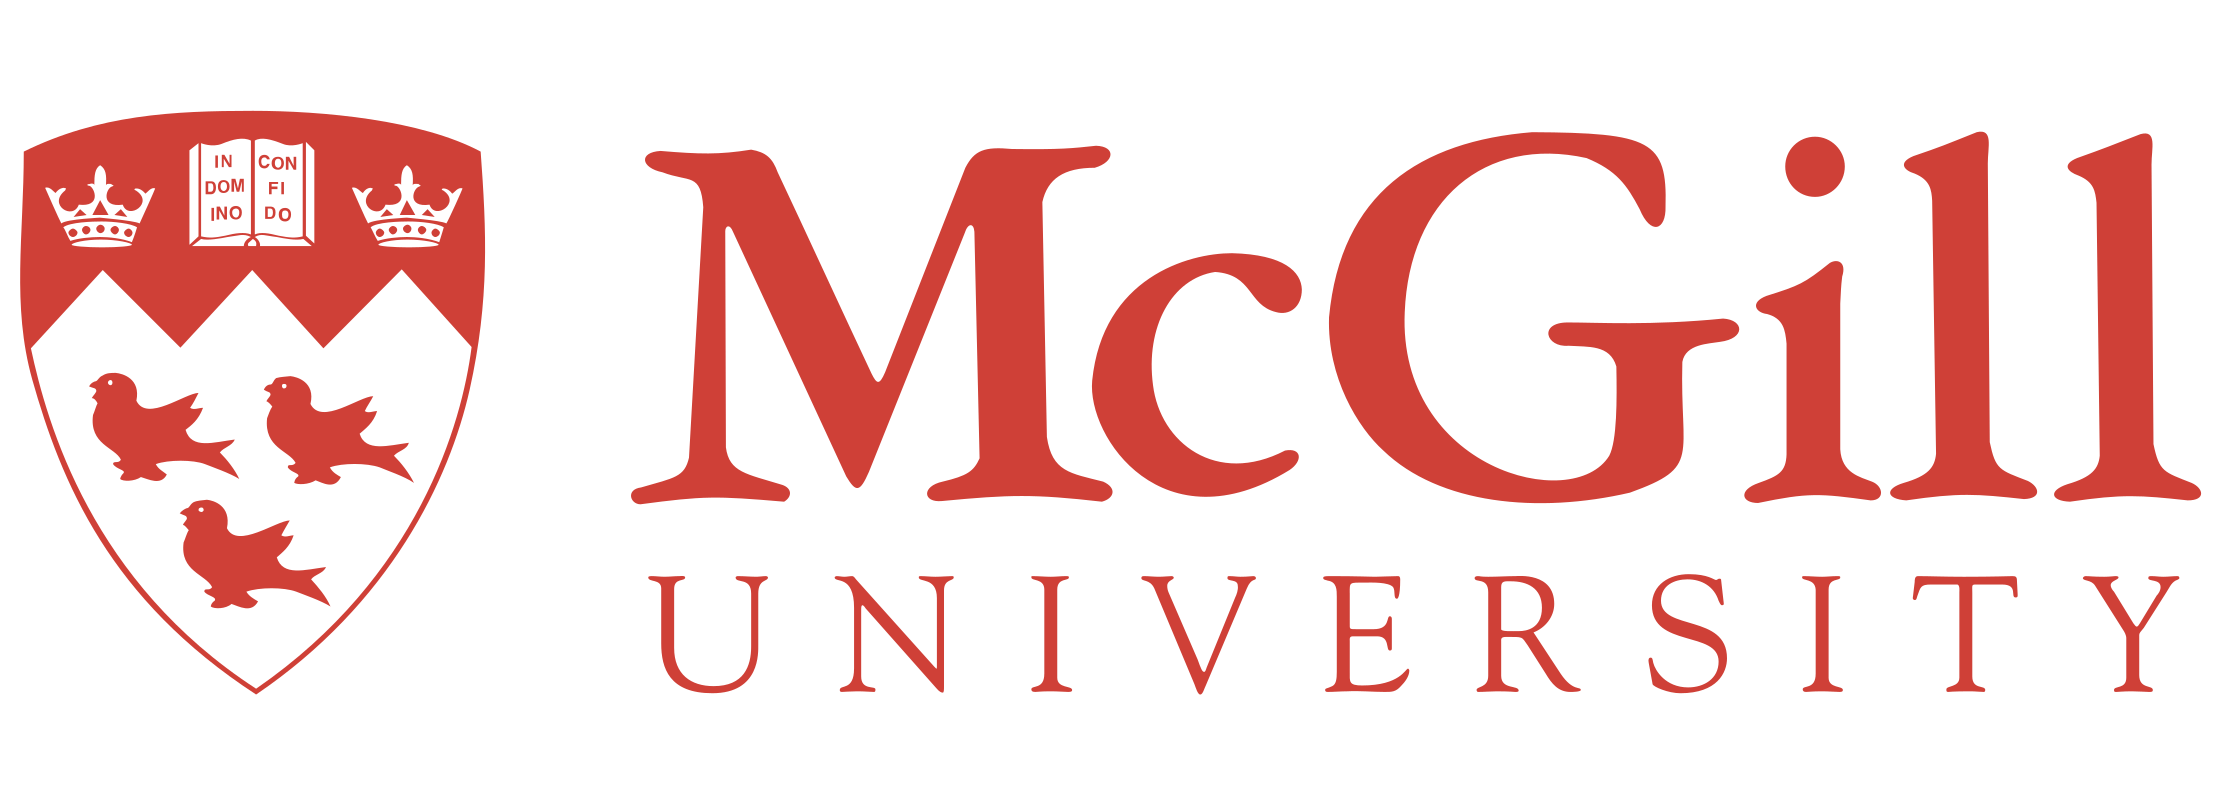 Russian | Doctorate / PhD | Languages | On Campus | McGill University | Canada